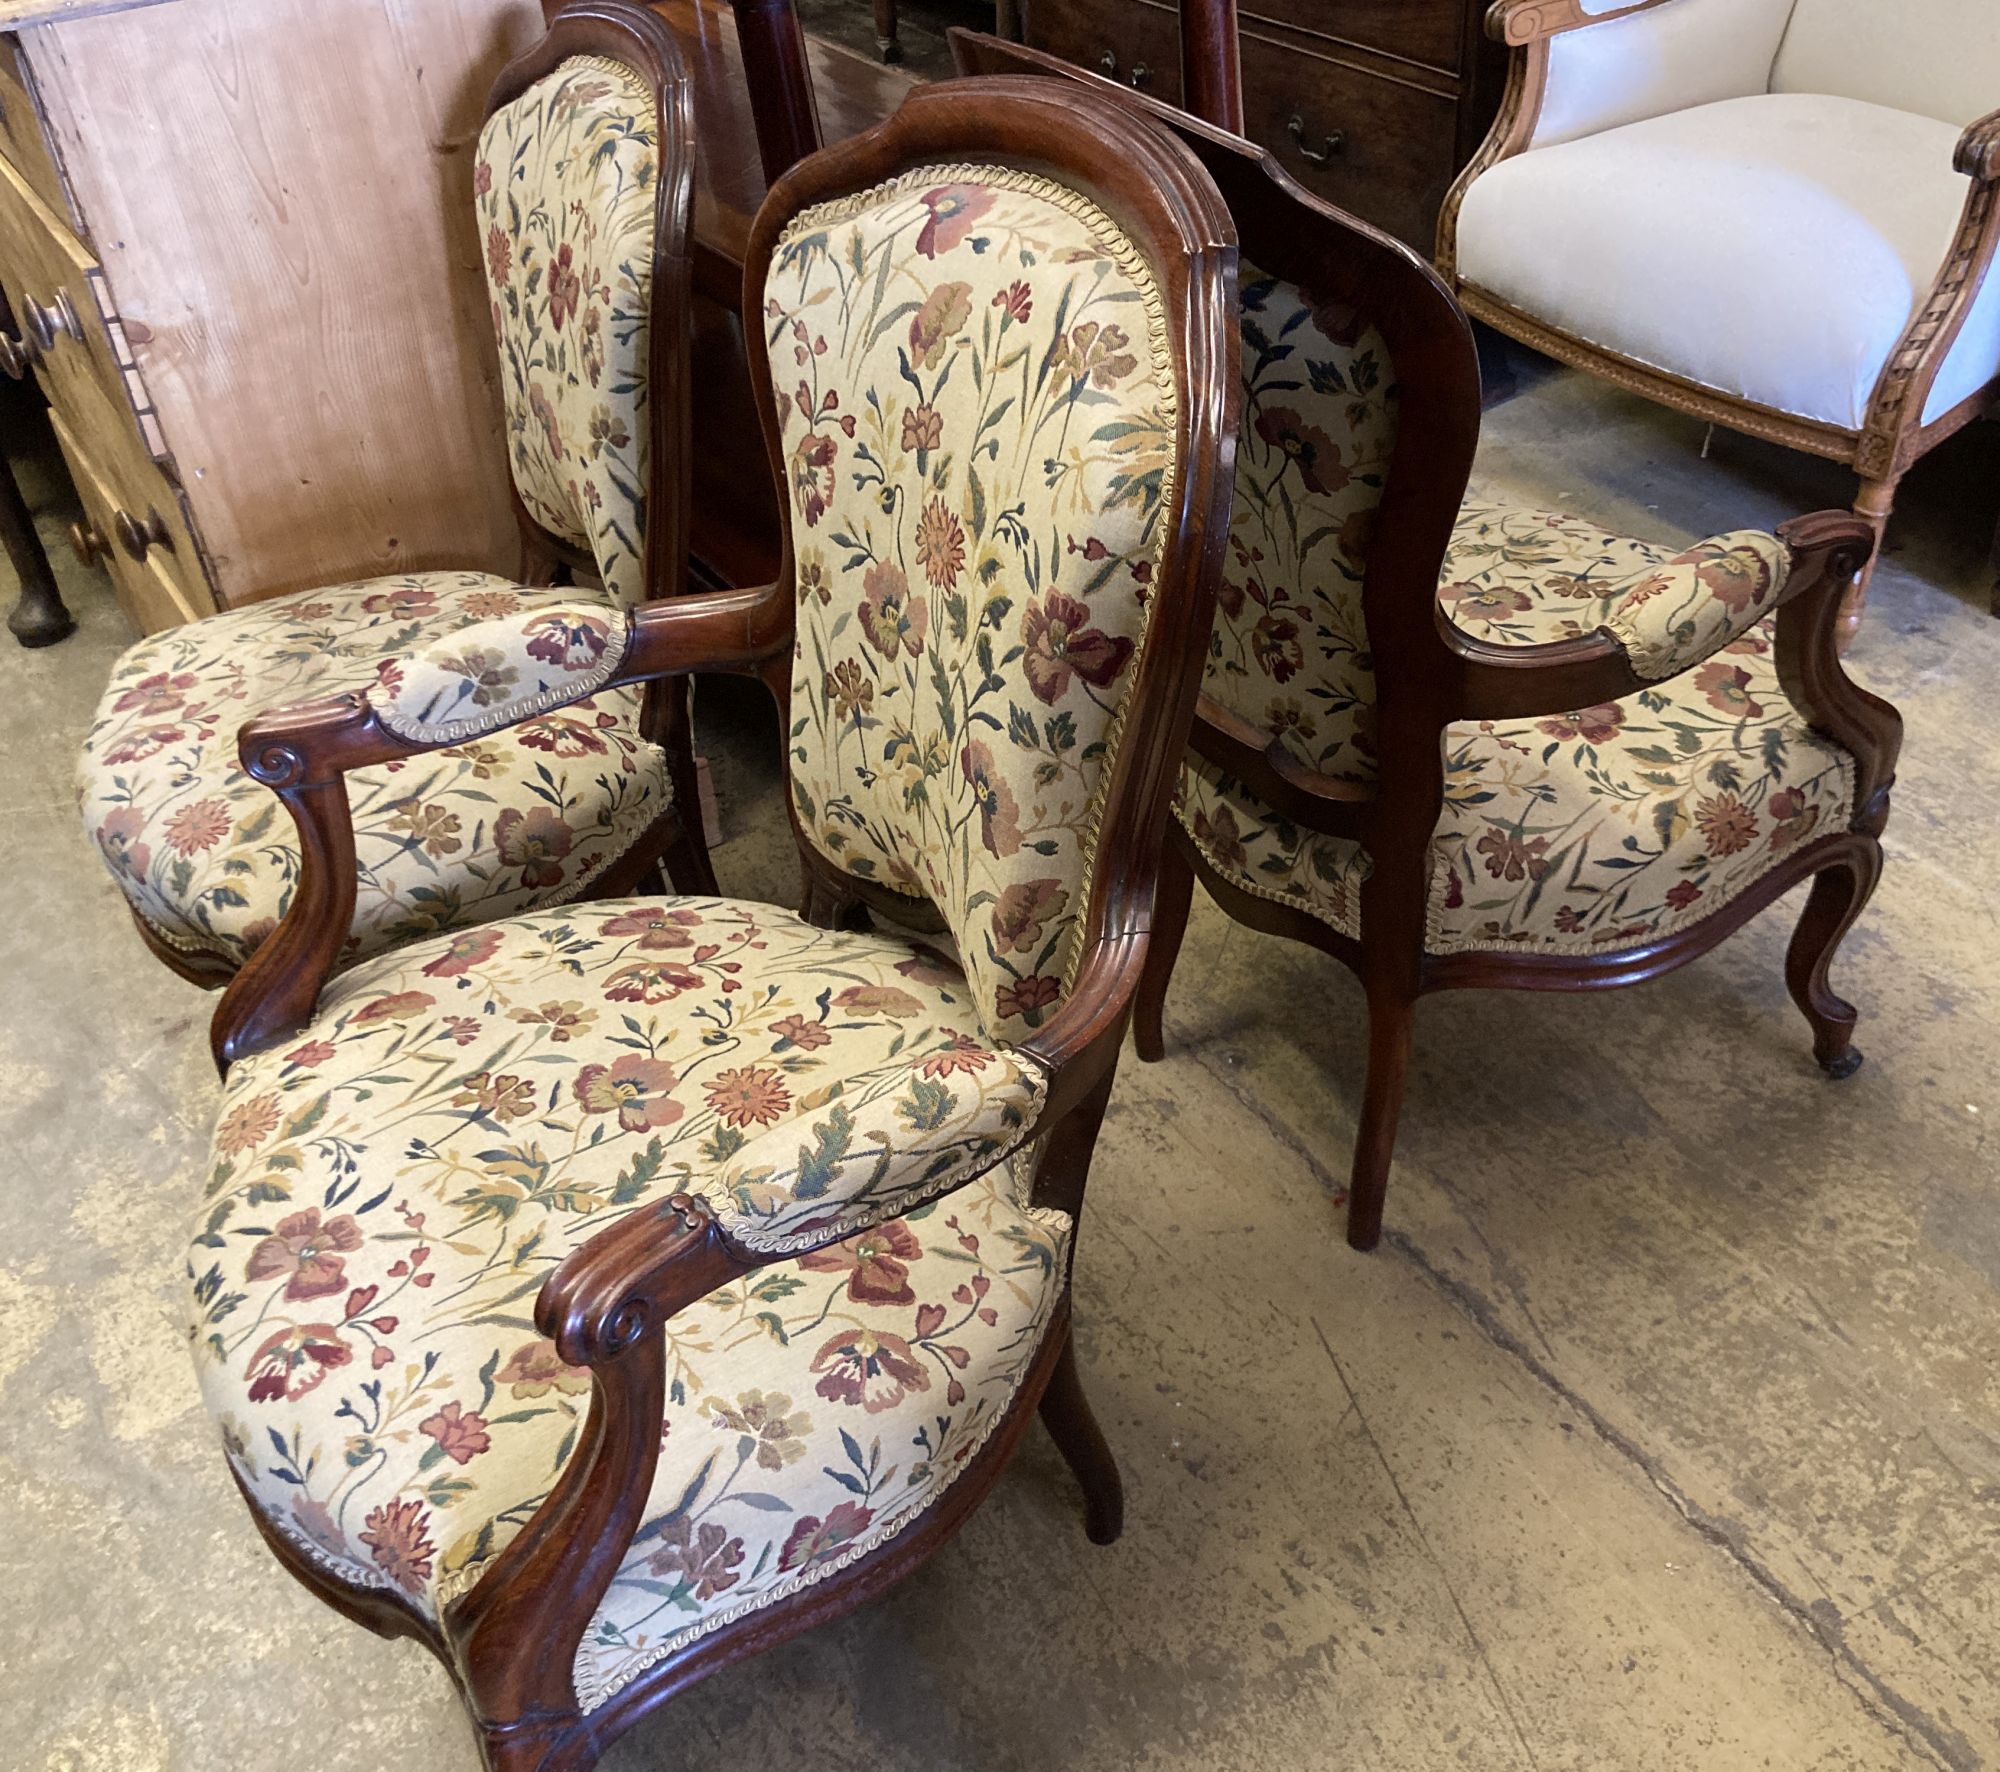 A pair of 19th century German mahogany armchairs and two side chairs